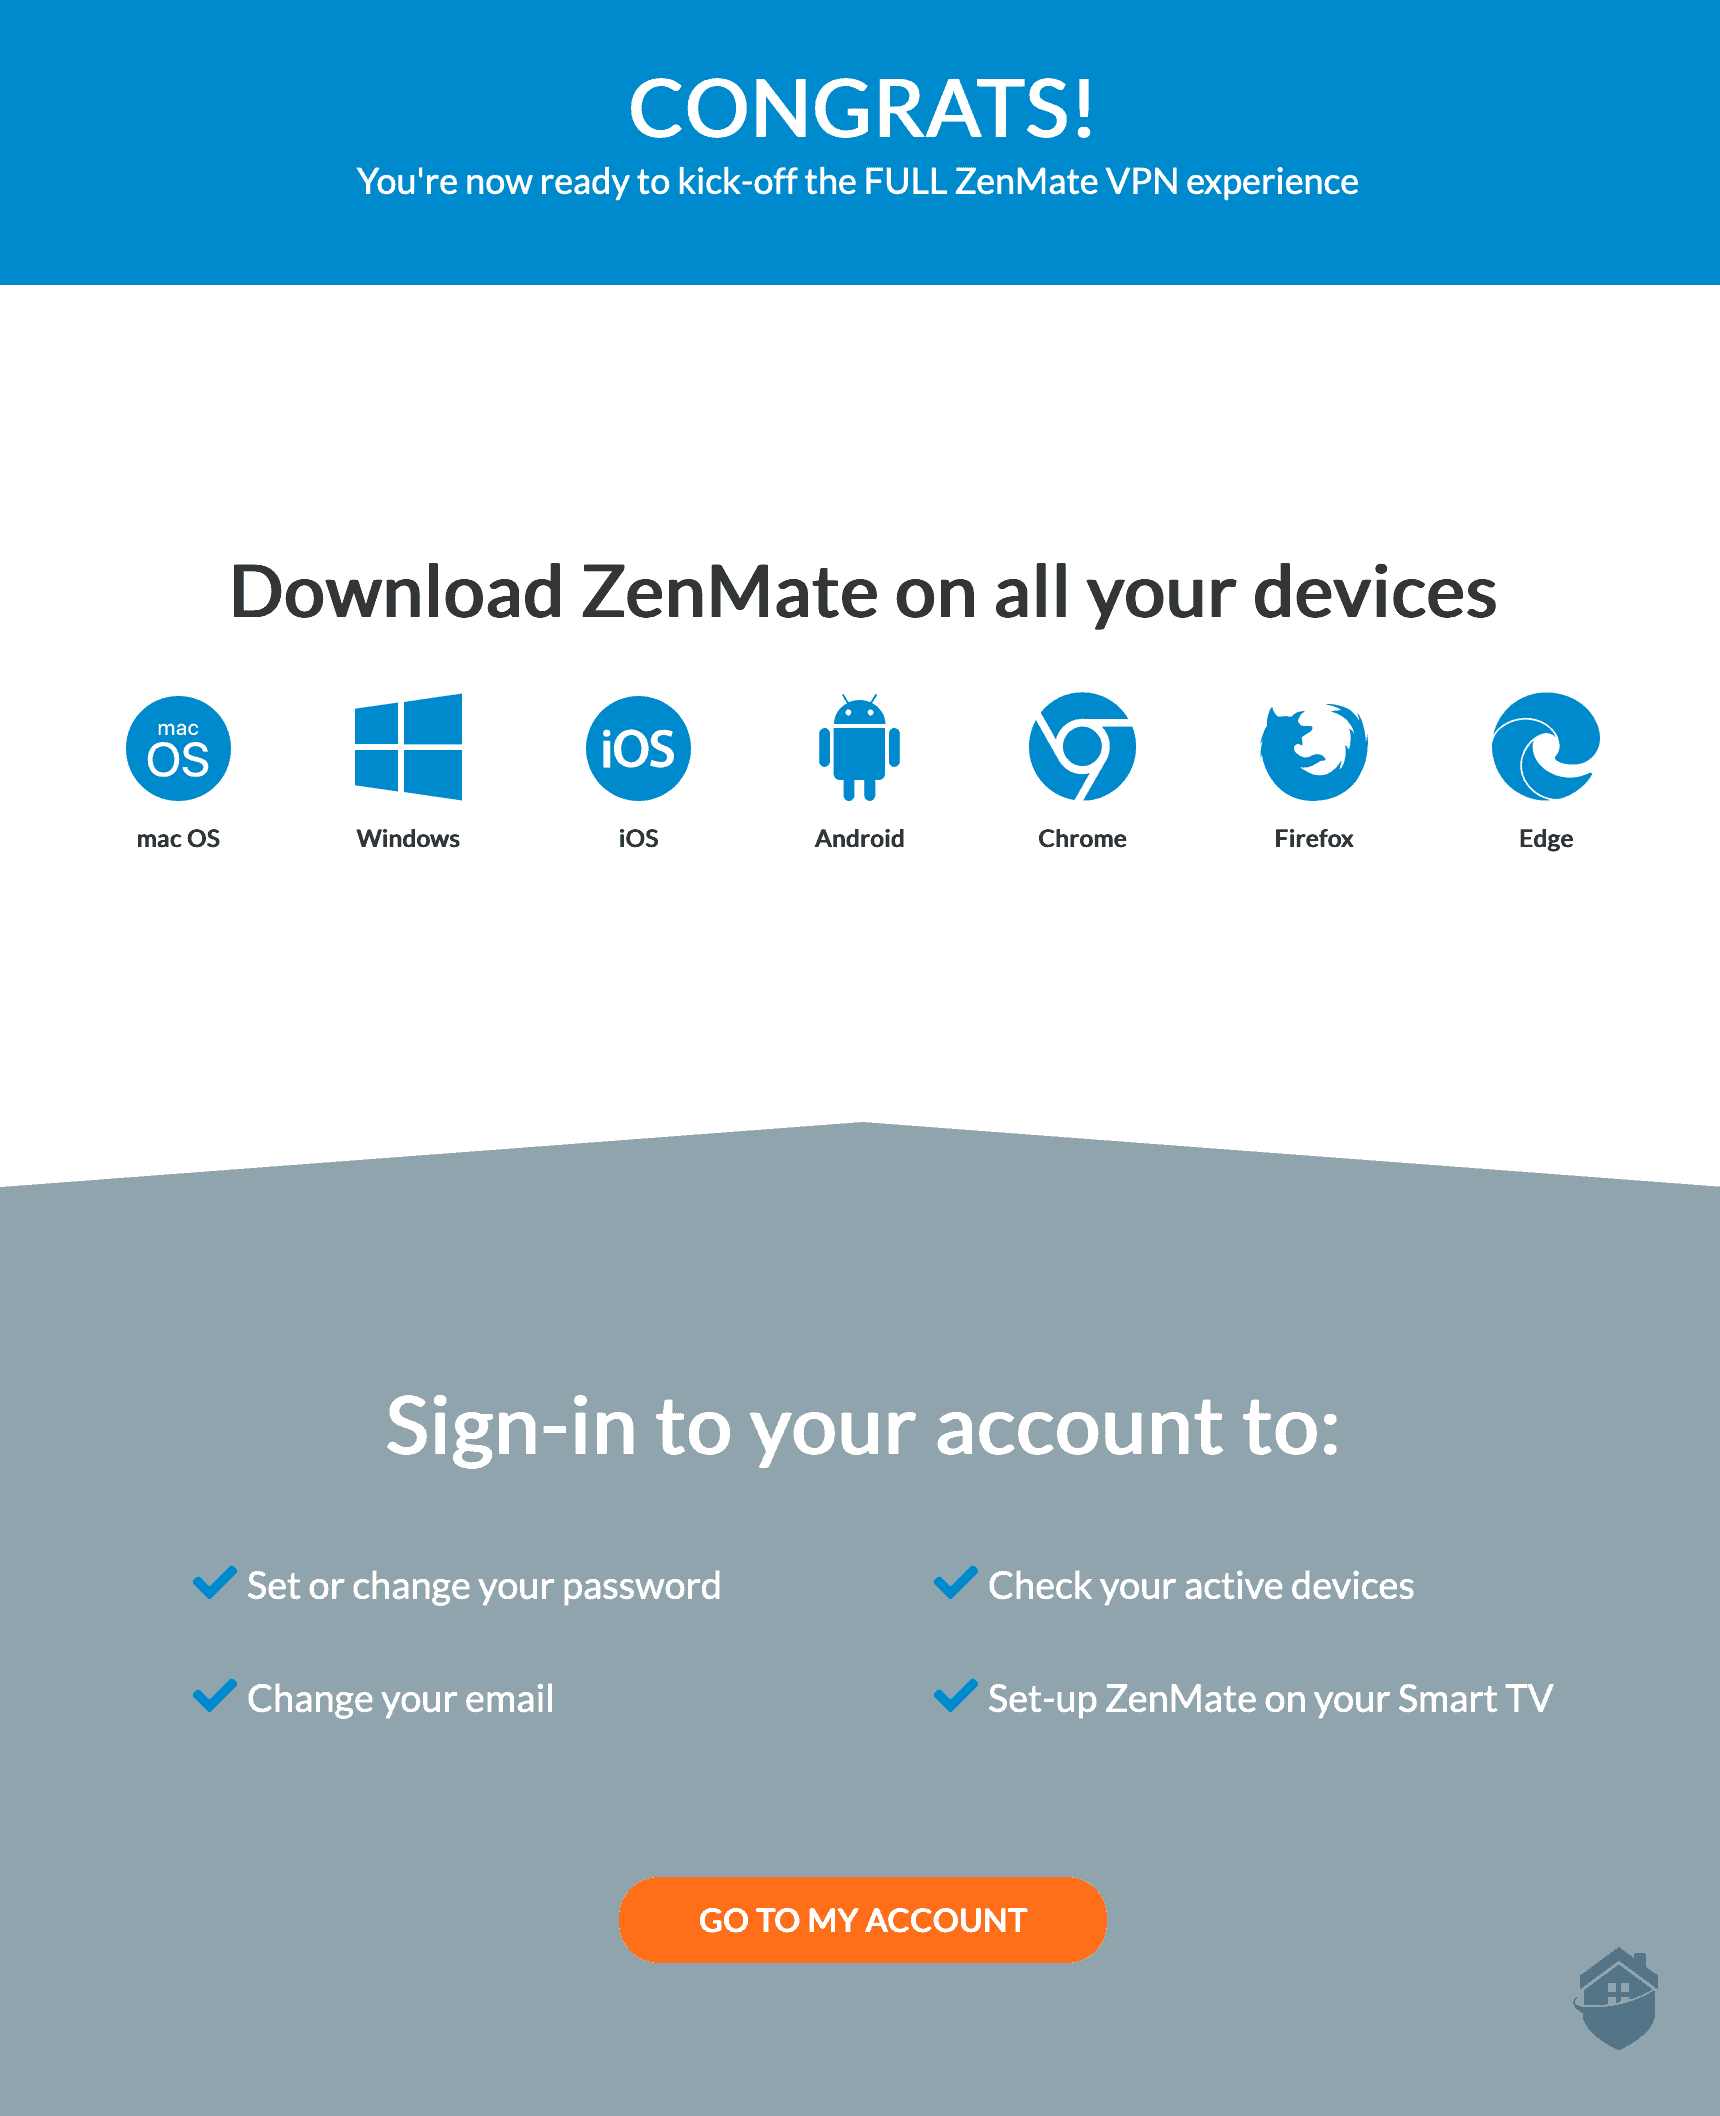 ZenMate is available on a number of platforms and devices